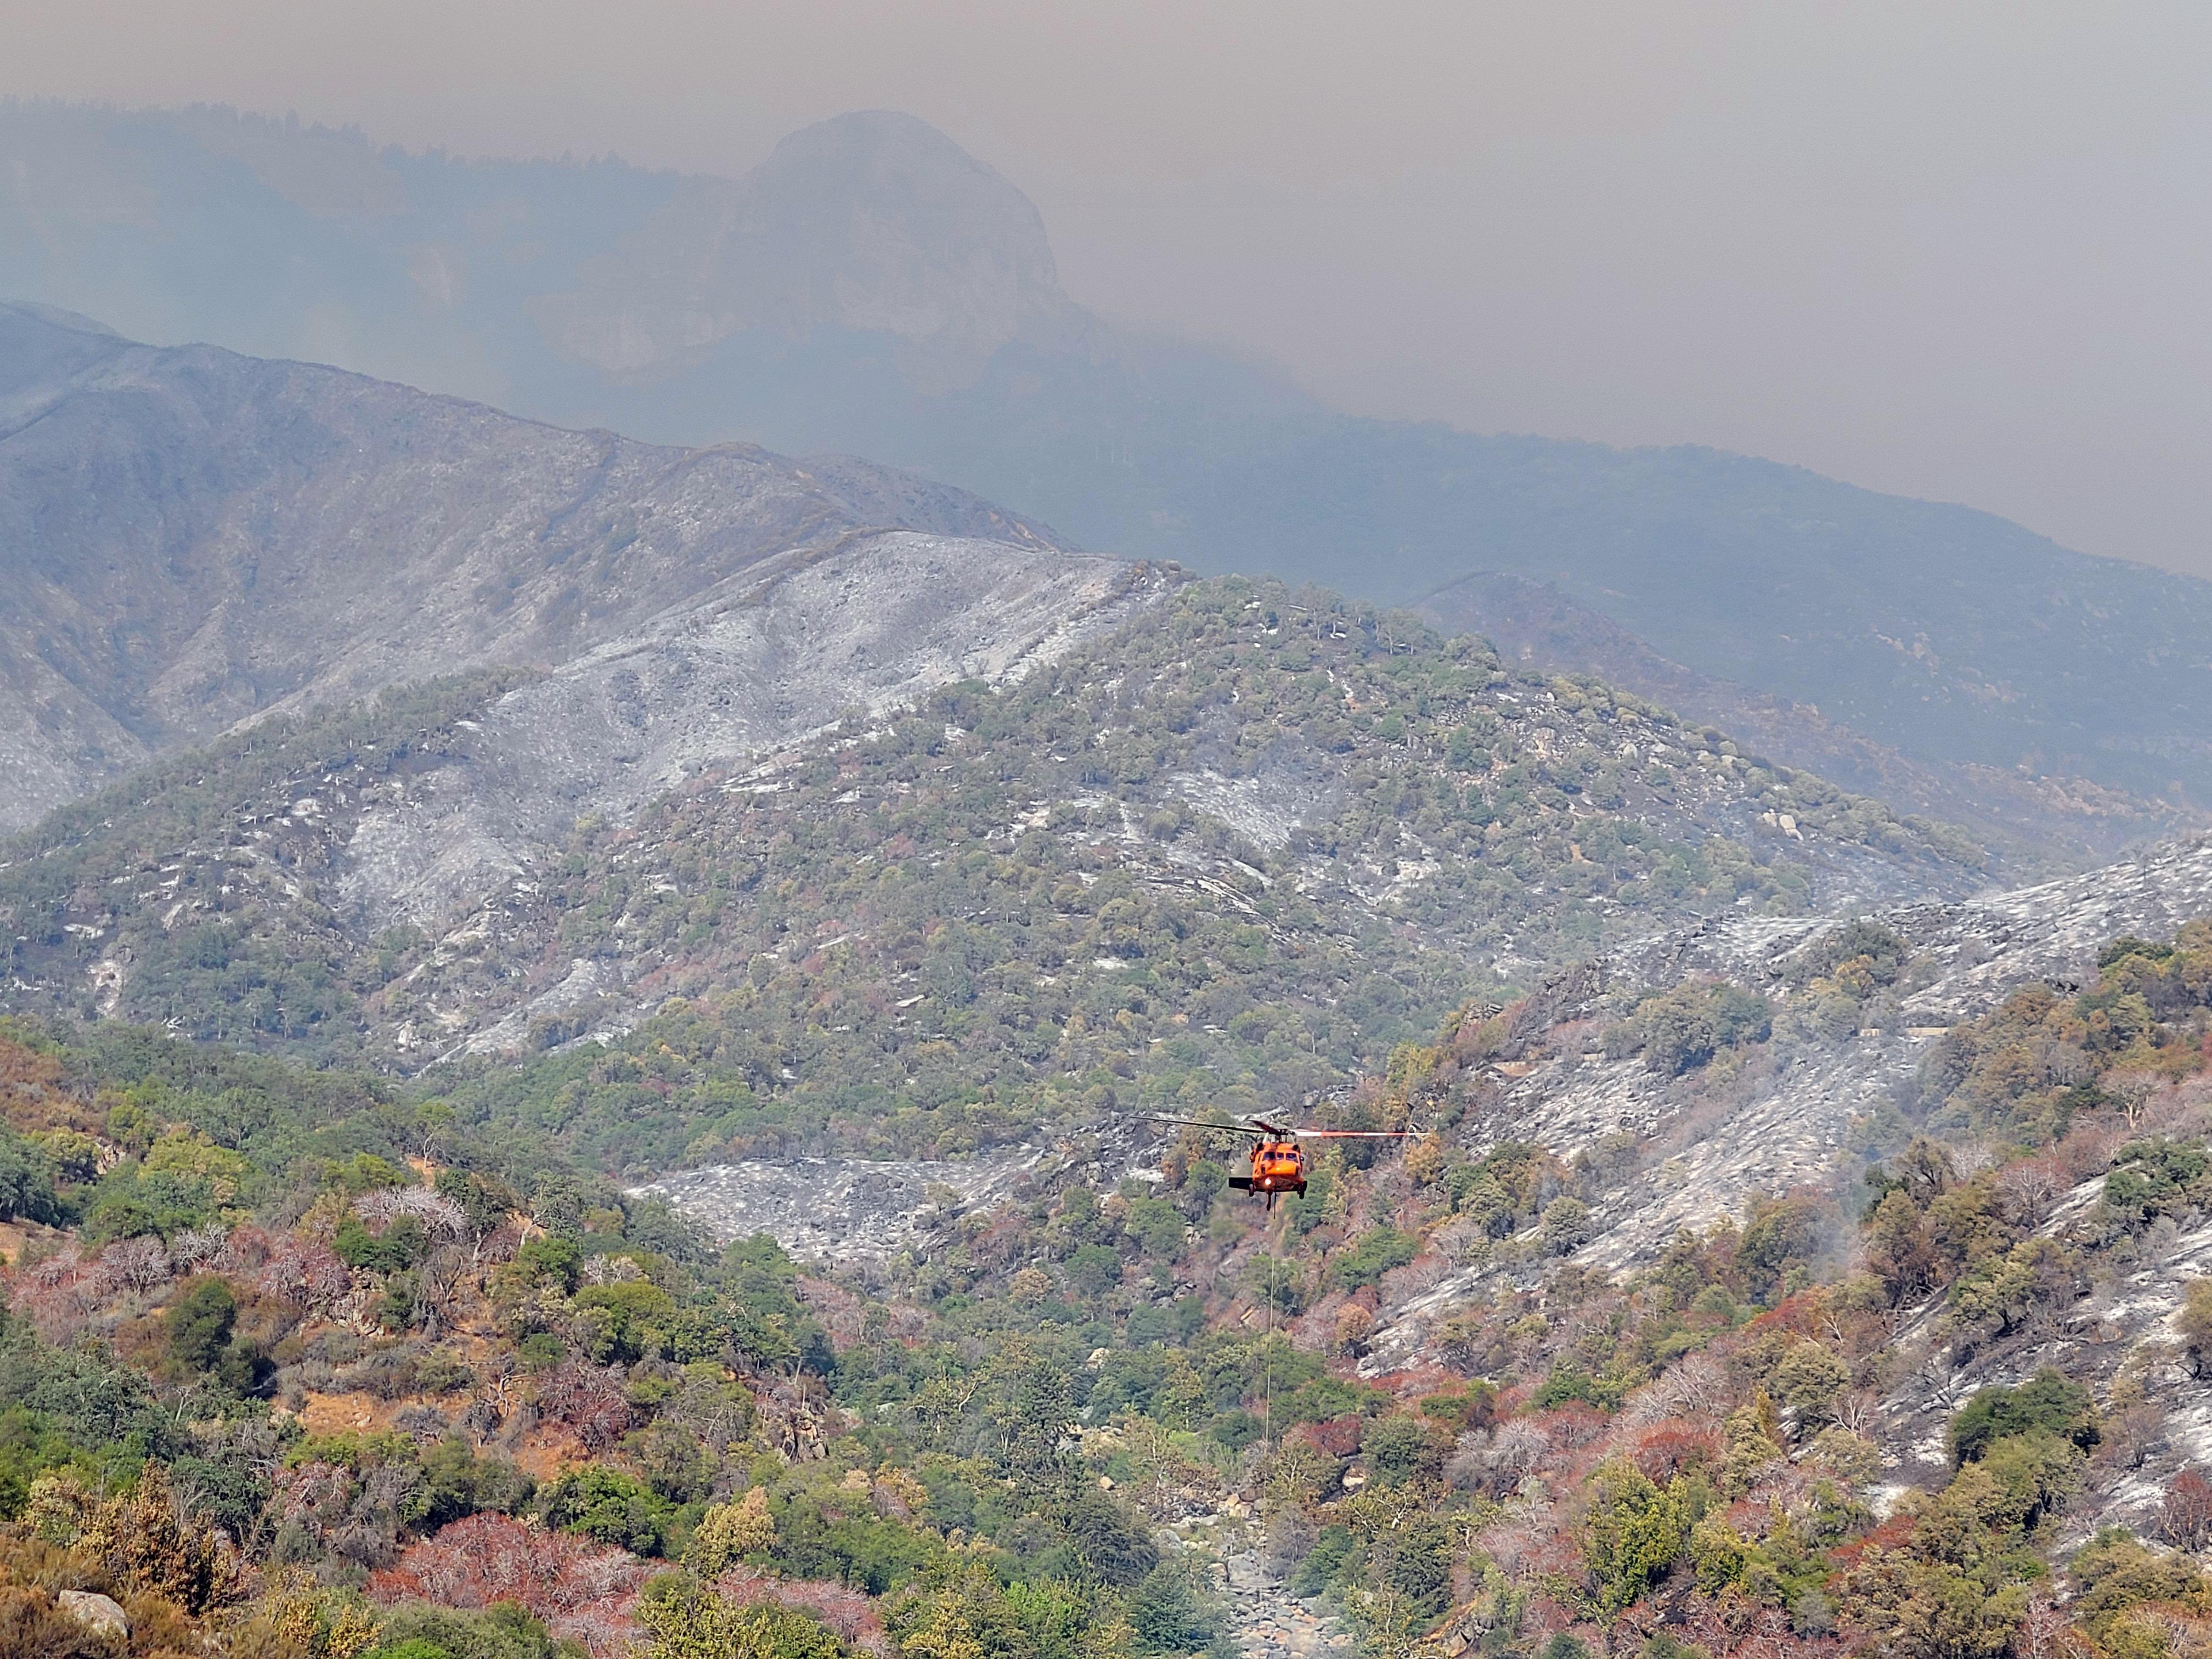 A helicopter flies over a rugged mountain landscape hazed in smoke. 